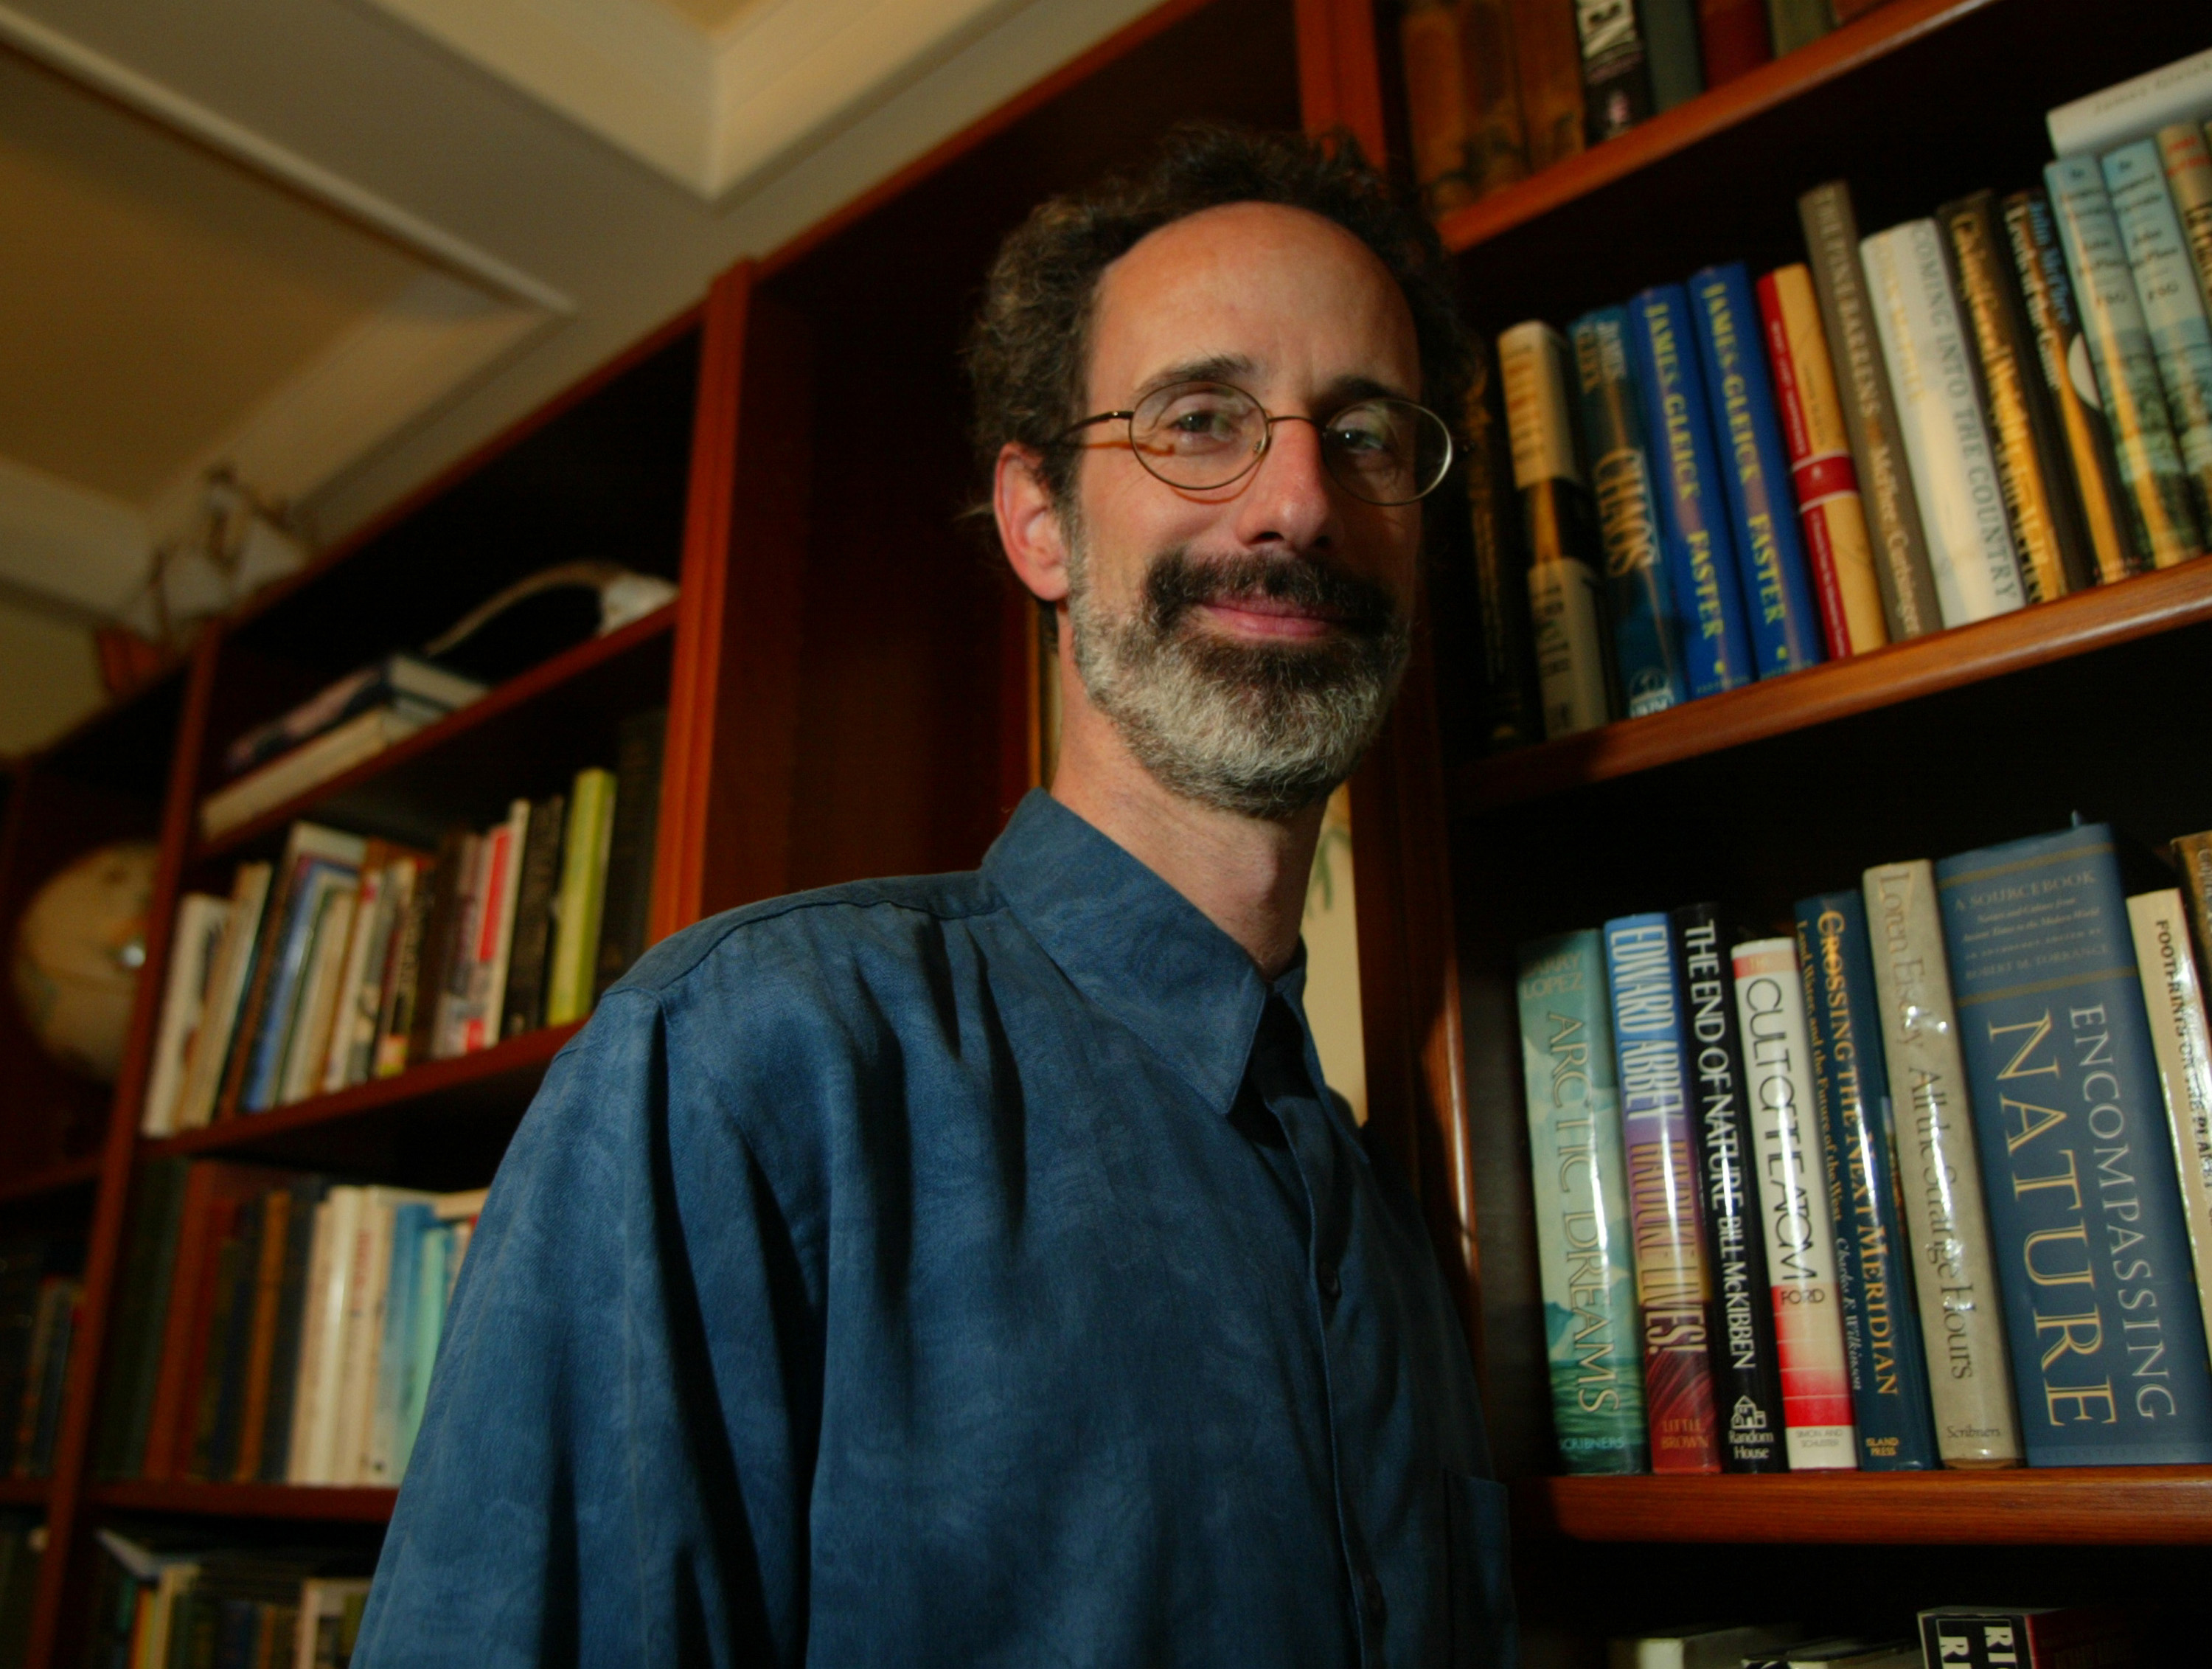 Peter Gleick co-founded the Pacific Institute, a global water think tank, in 1987 and now serves as its president emeritus and chief scientist. 